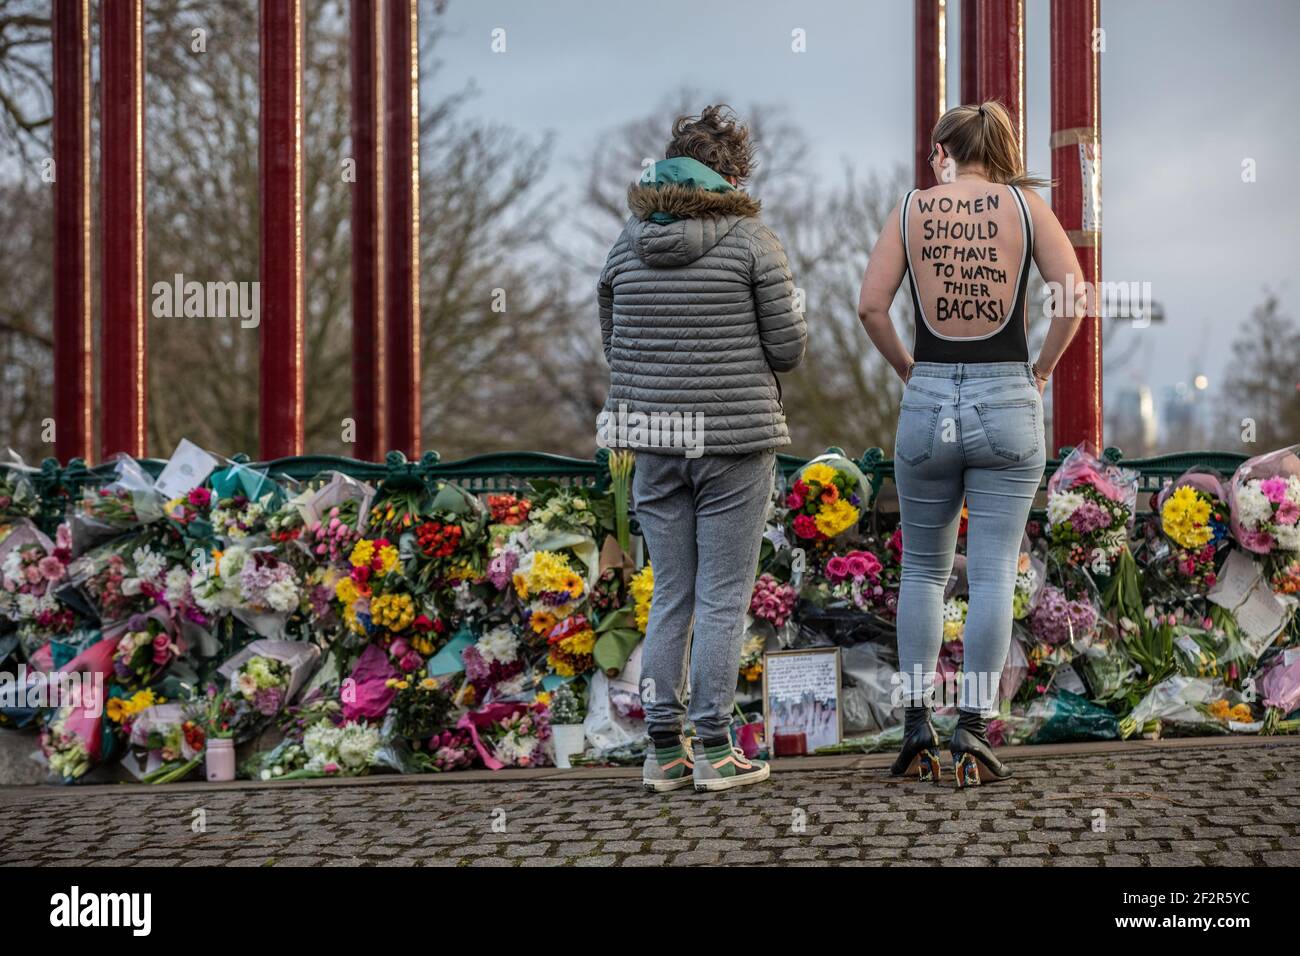 London, UK. 13th Mar 2021. Women's Safety Campaigners stand looking at the flowers and tributes for Miss Everard at the bandstand on Clapham Common where they are planning to stage a vigil tonight. 13th March 2021 Clapham Common, Southwest London, England, United Kingdom Credit: Jeff Gilbert/Alamy Live News Stock Photo